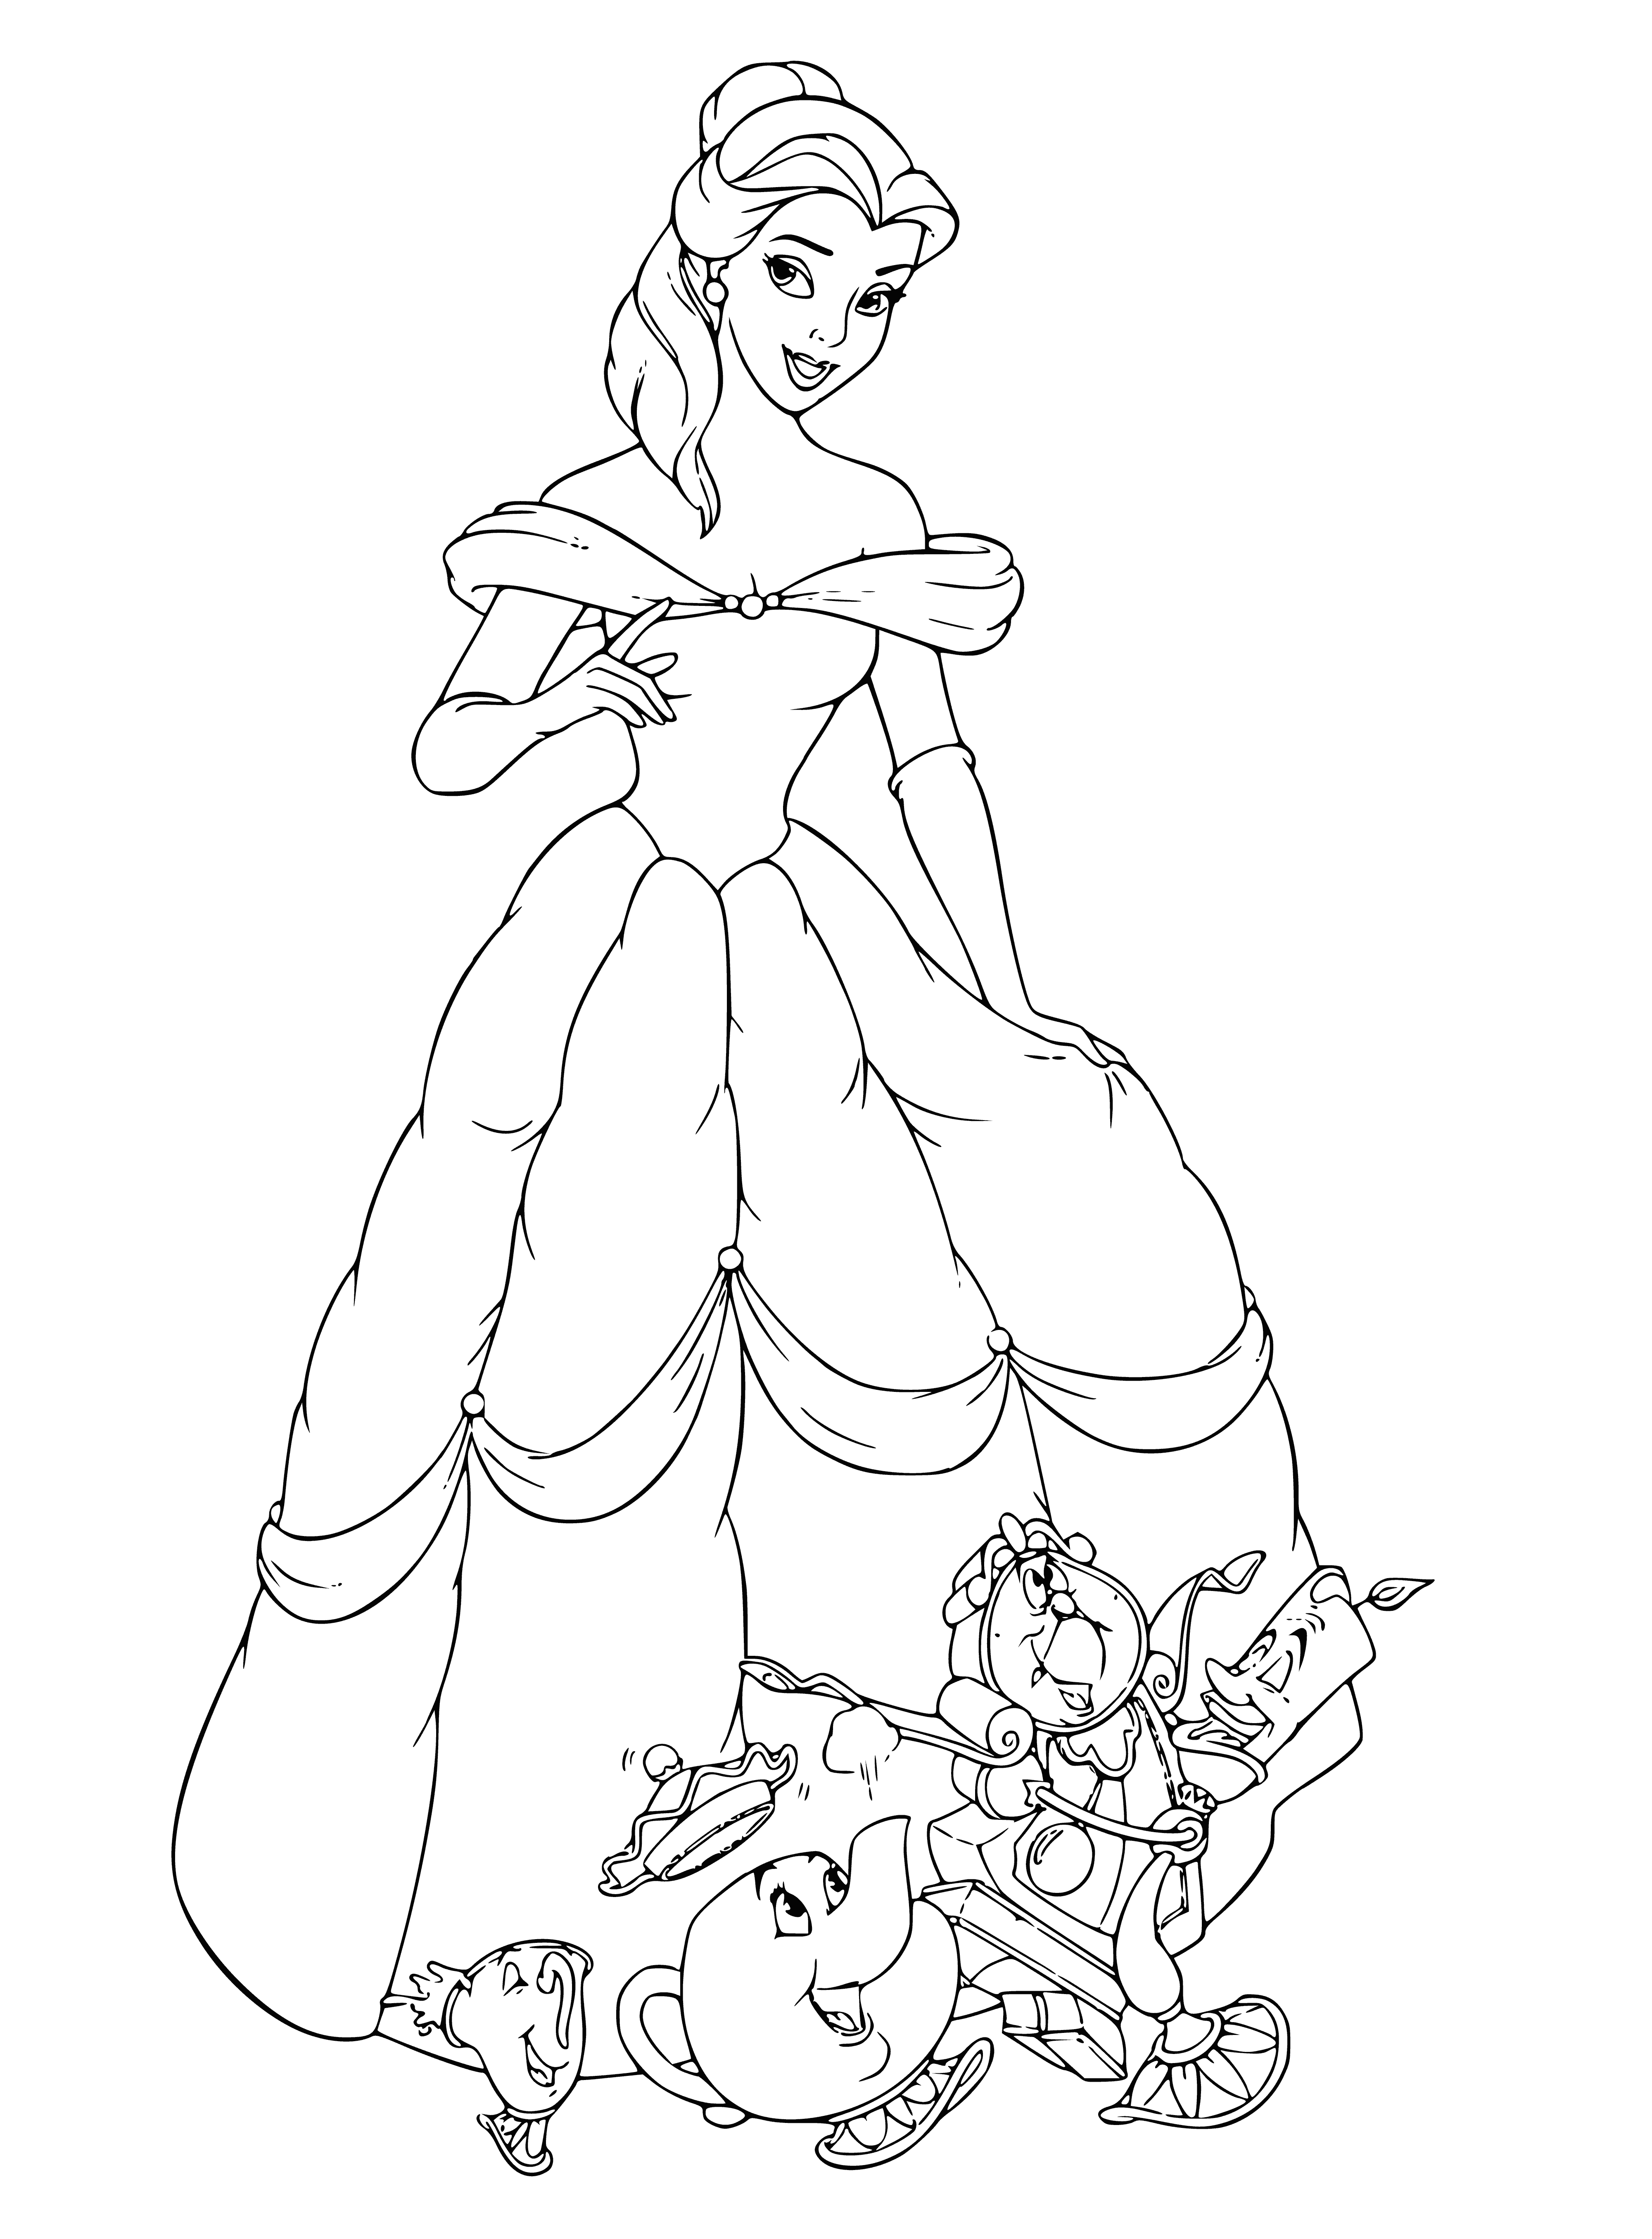 Belle, Chip, Mrs Potts, Cogsworth and Lumiere coloring page